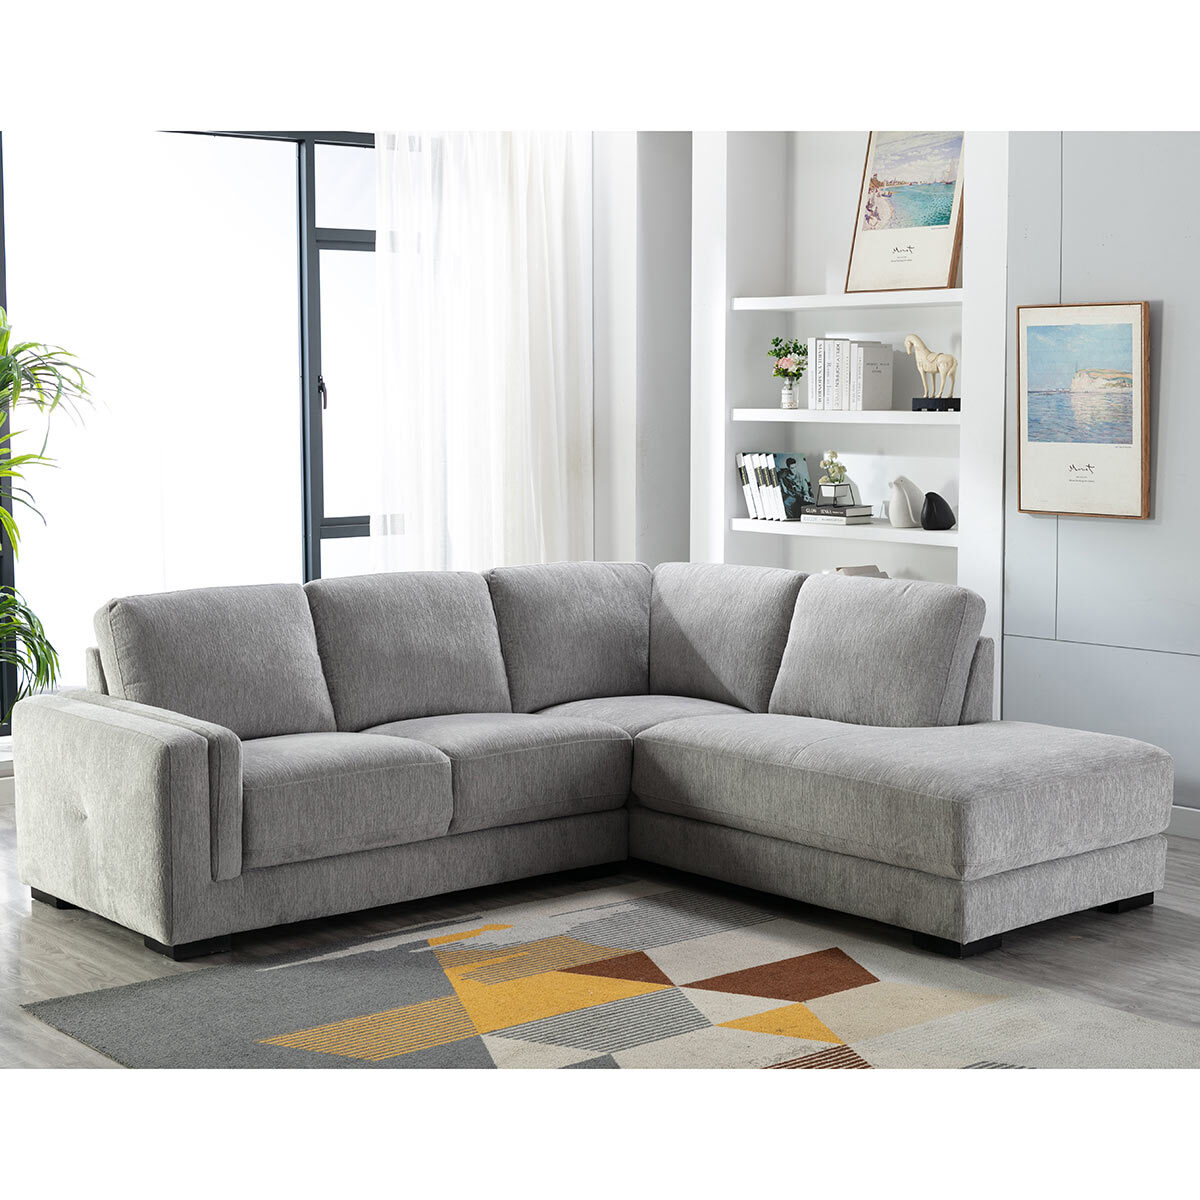 Zoy Sherwood Grey Fabric Sectional Sofa, How Much Fabric To Cover A Sectional Sofa